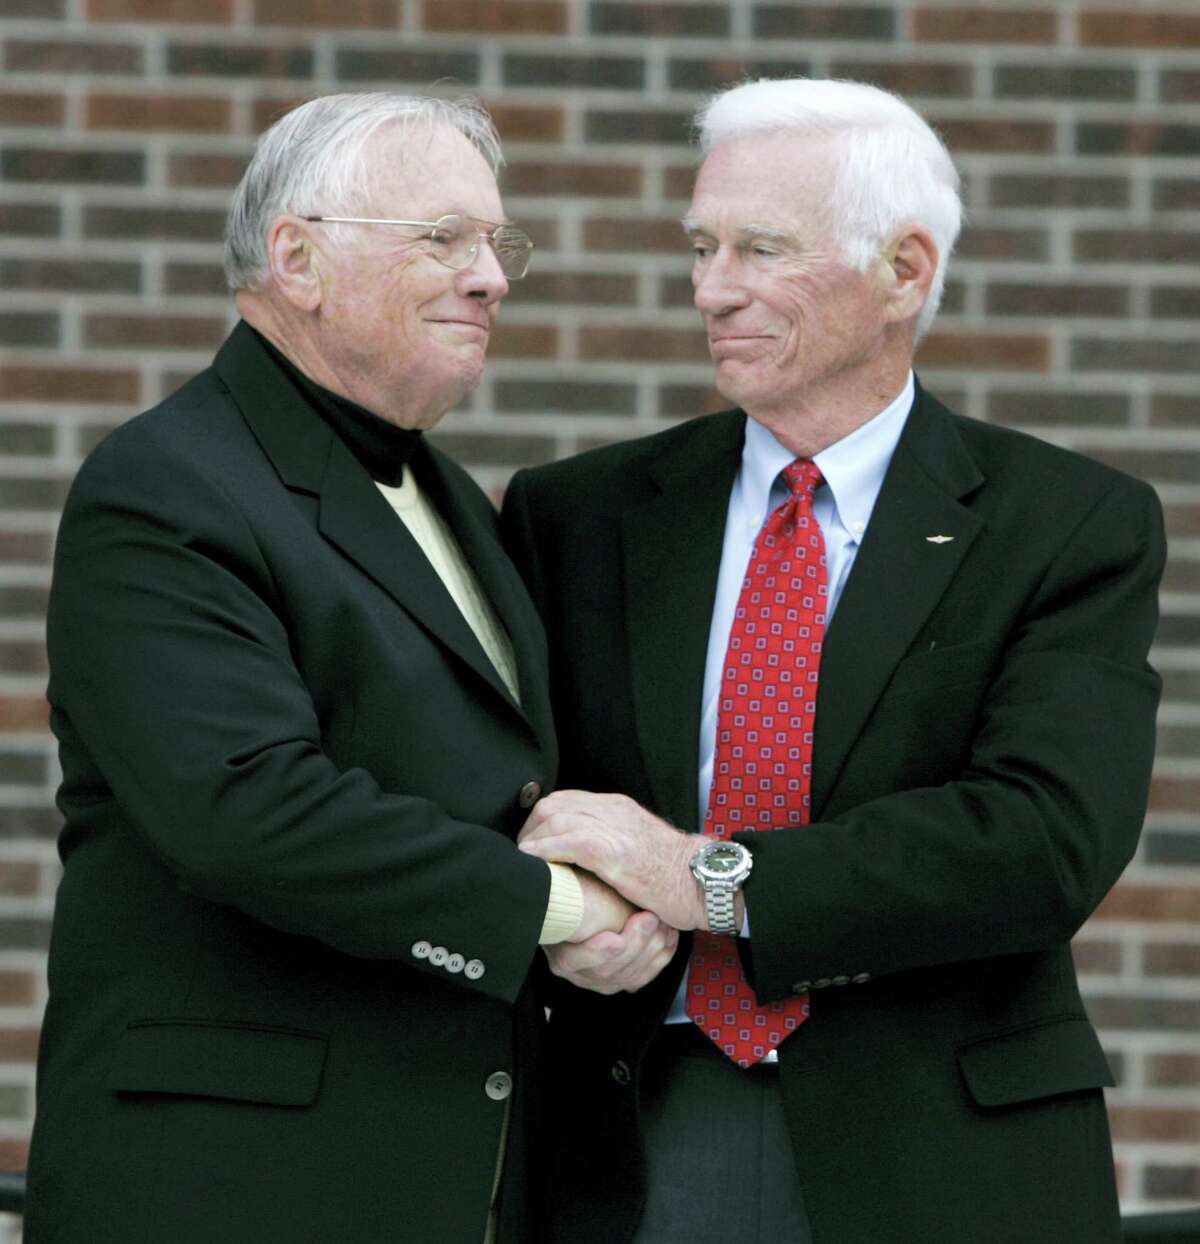 FILE - In a Oct. 27, 2007 file photo, former astronaut Neil Armstrong, left, is congratulated by fellow ex-astronaut Gene Cernan following the dedication ceremony of the Neil Armstrong Hall of Engineering at Purdue University in West Lafayette, Ind. NASA announced that former astronaut Gene Cernan, the last man to walk on the moon, died Monday, Jan. 16, 2017, surrounded by his family. He was 82.